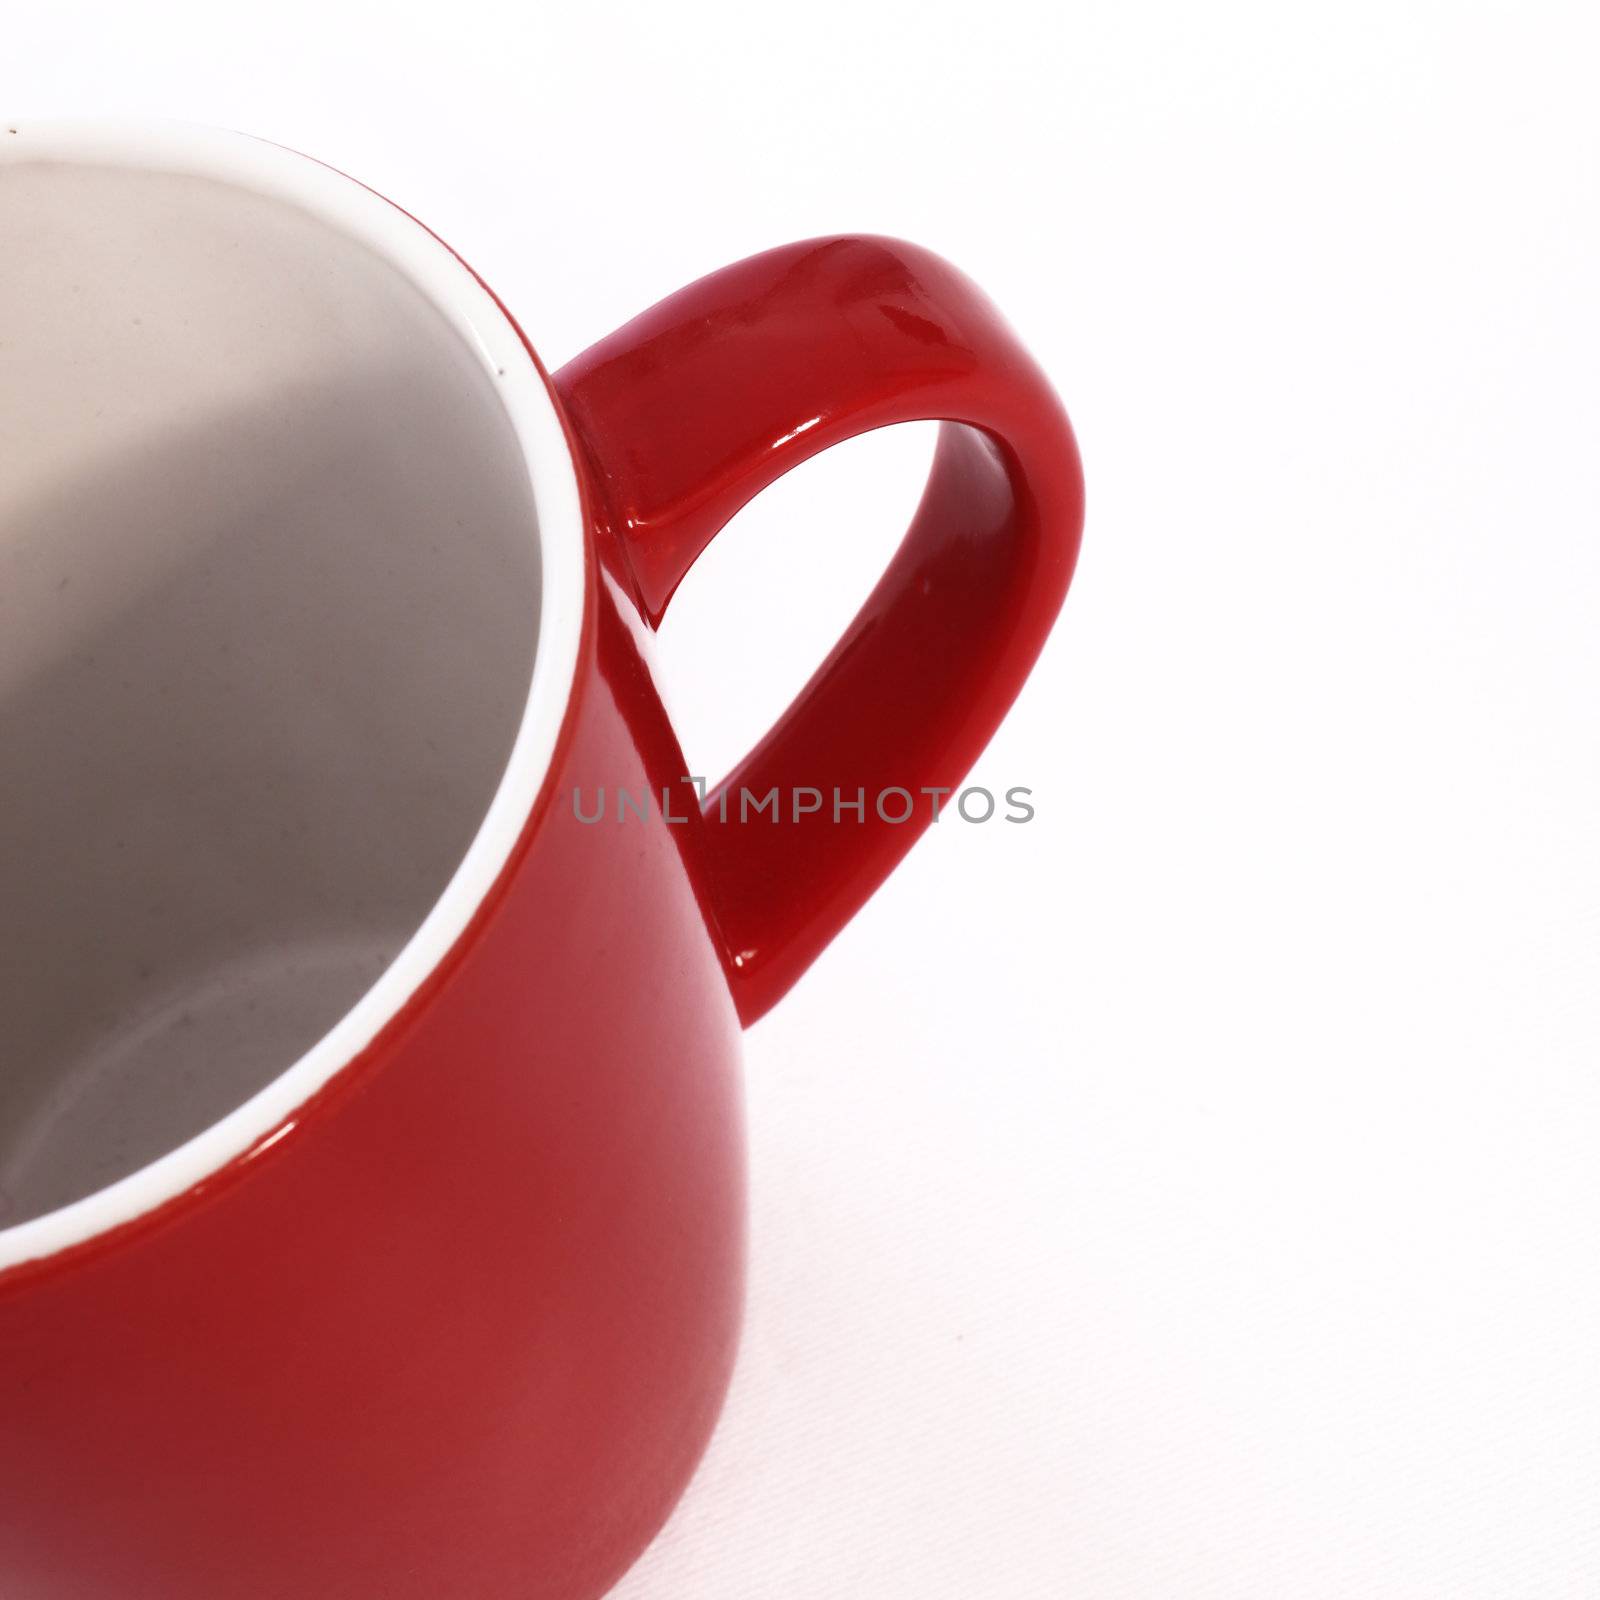 High angle partial cropped view looking inside an empty red ceramic coffee mug isolated on white